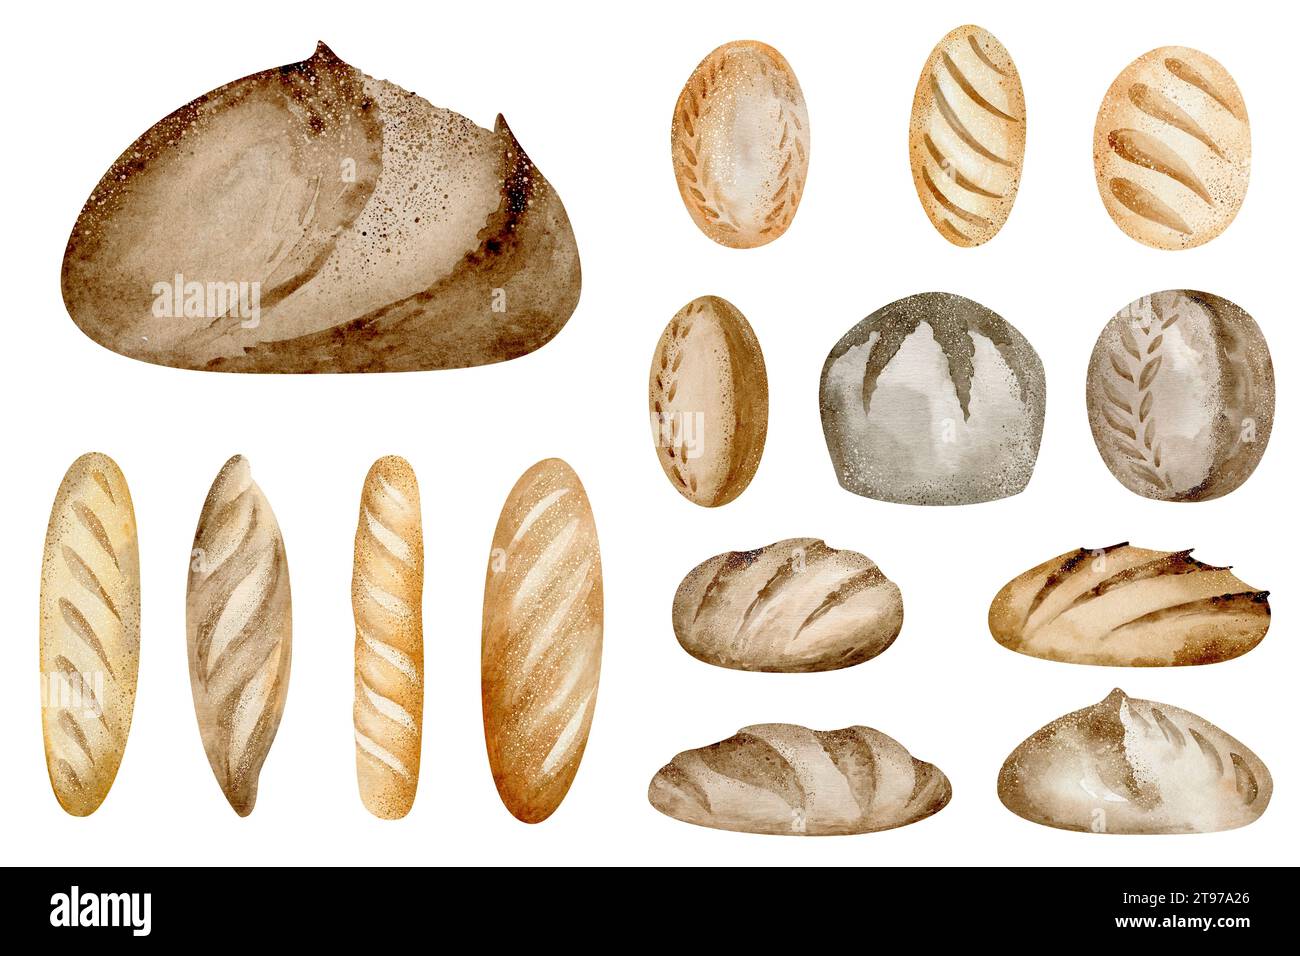 Bread baking clipart. Watercolor illustration of food on an isolated background. A set of individual elements of wheat buns and baguettes for menu and Stock Photo